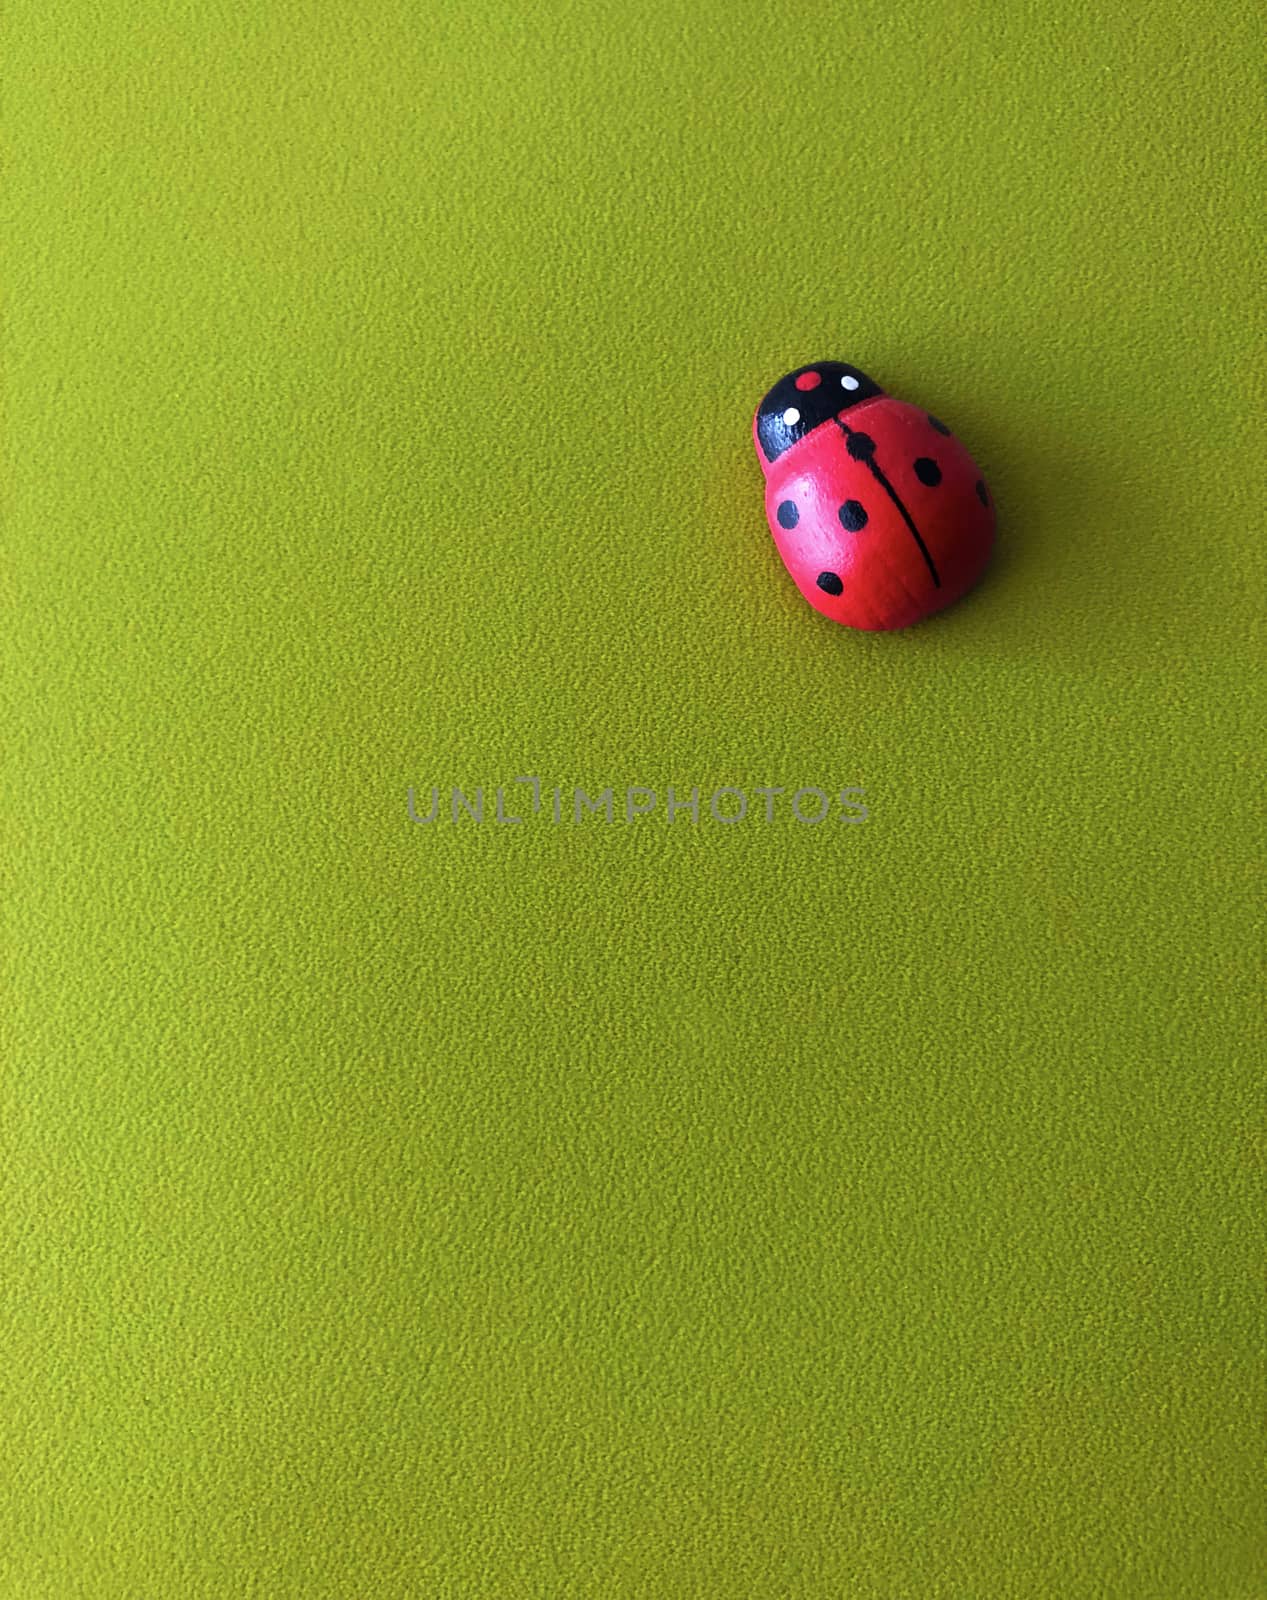 Ladybird concept isolated on green background by F1b0nacci